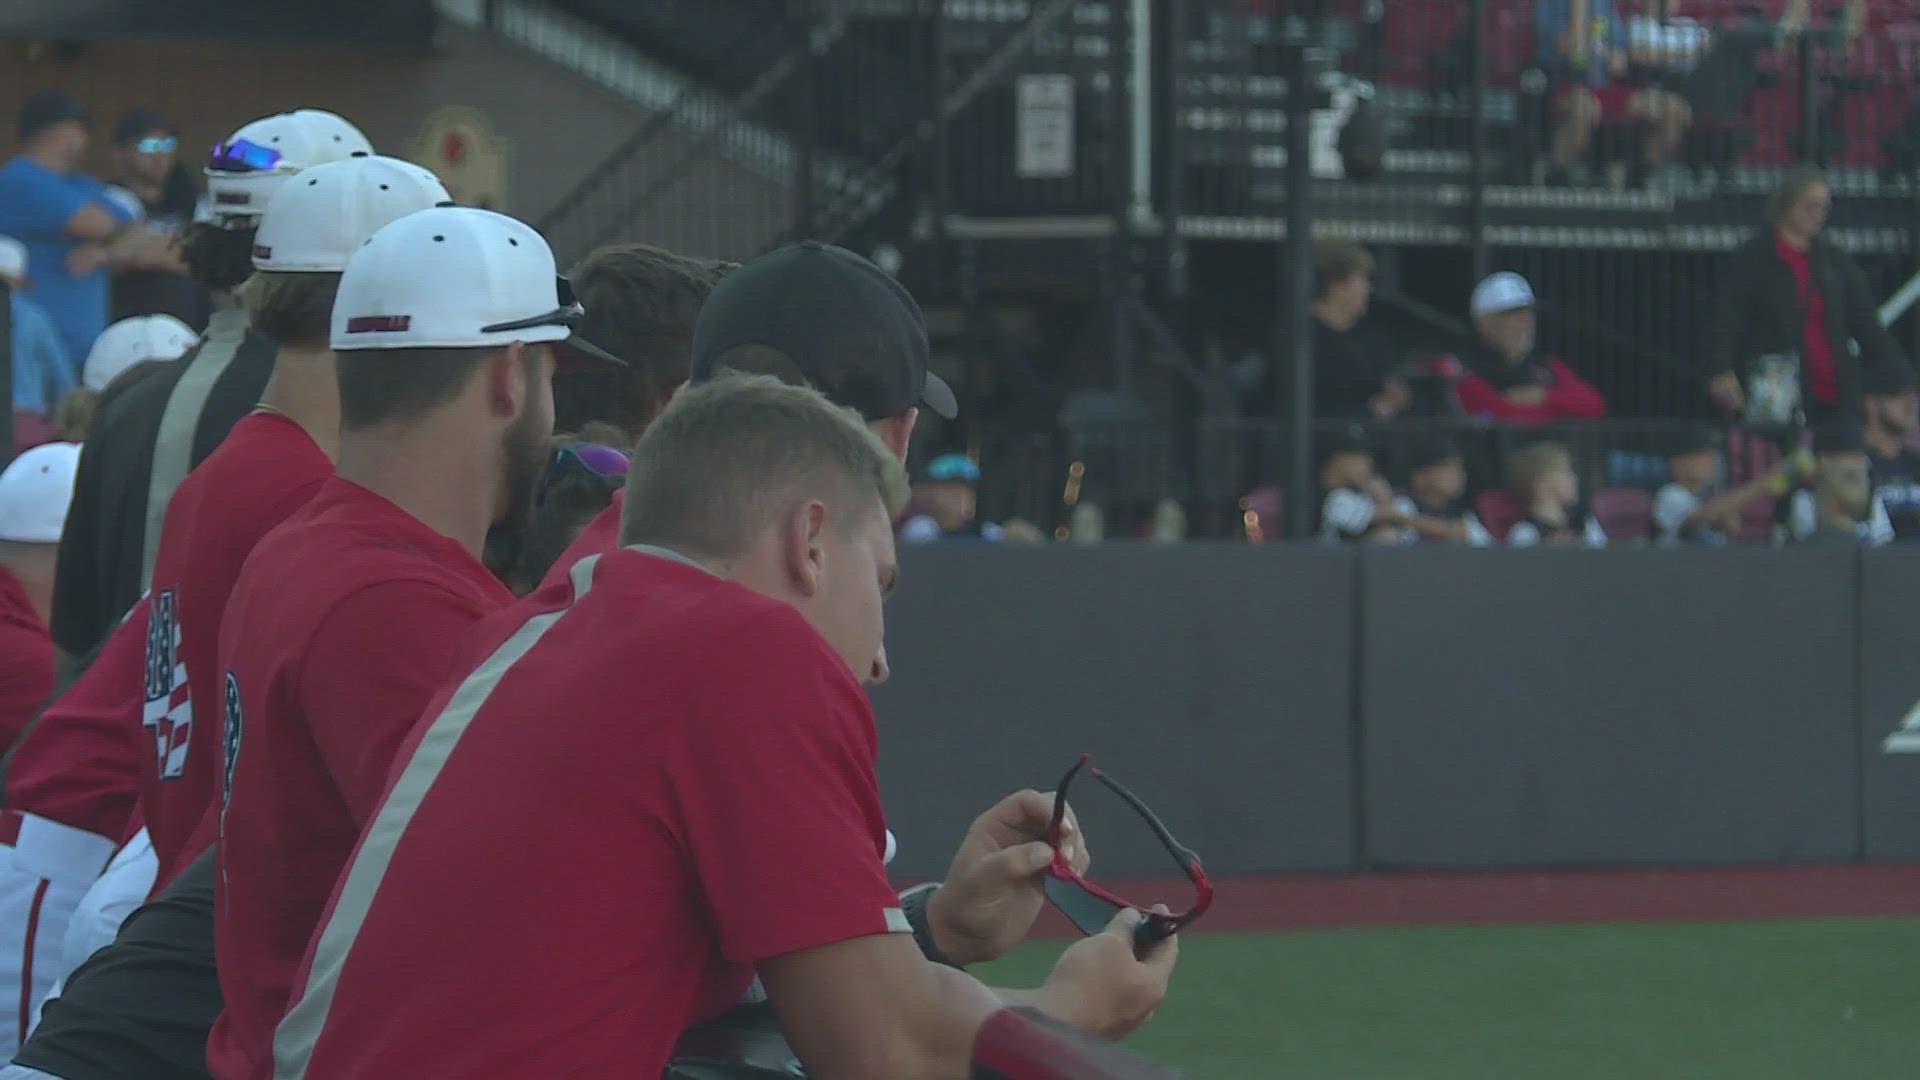 Louisville Baseball has hosted a game to honor first responders for six years.